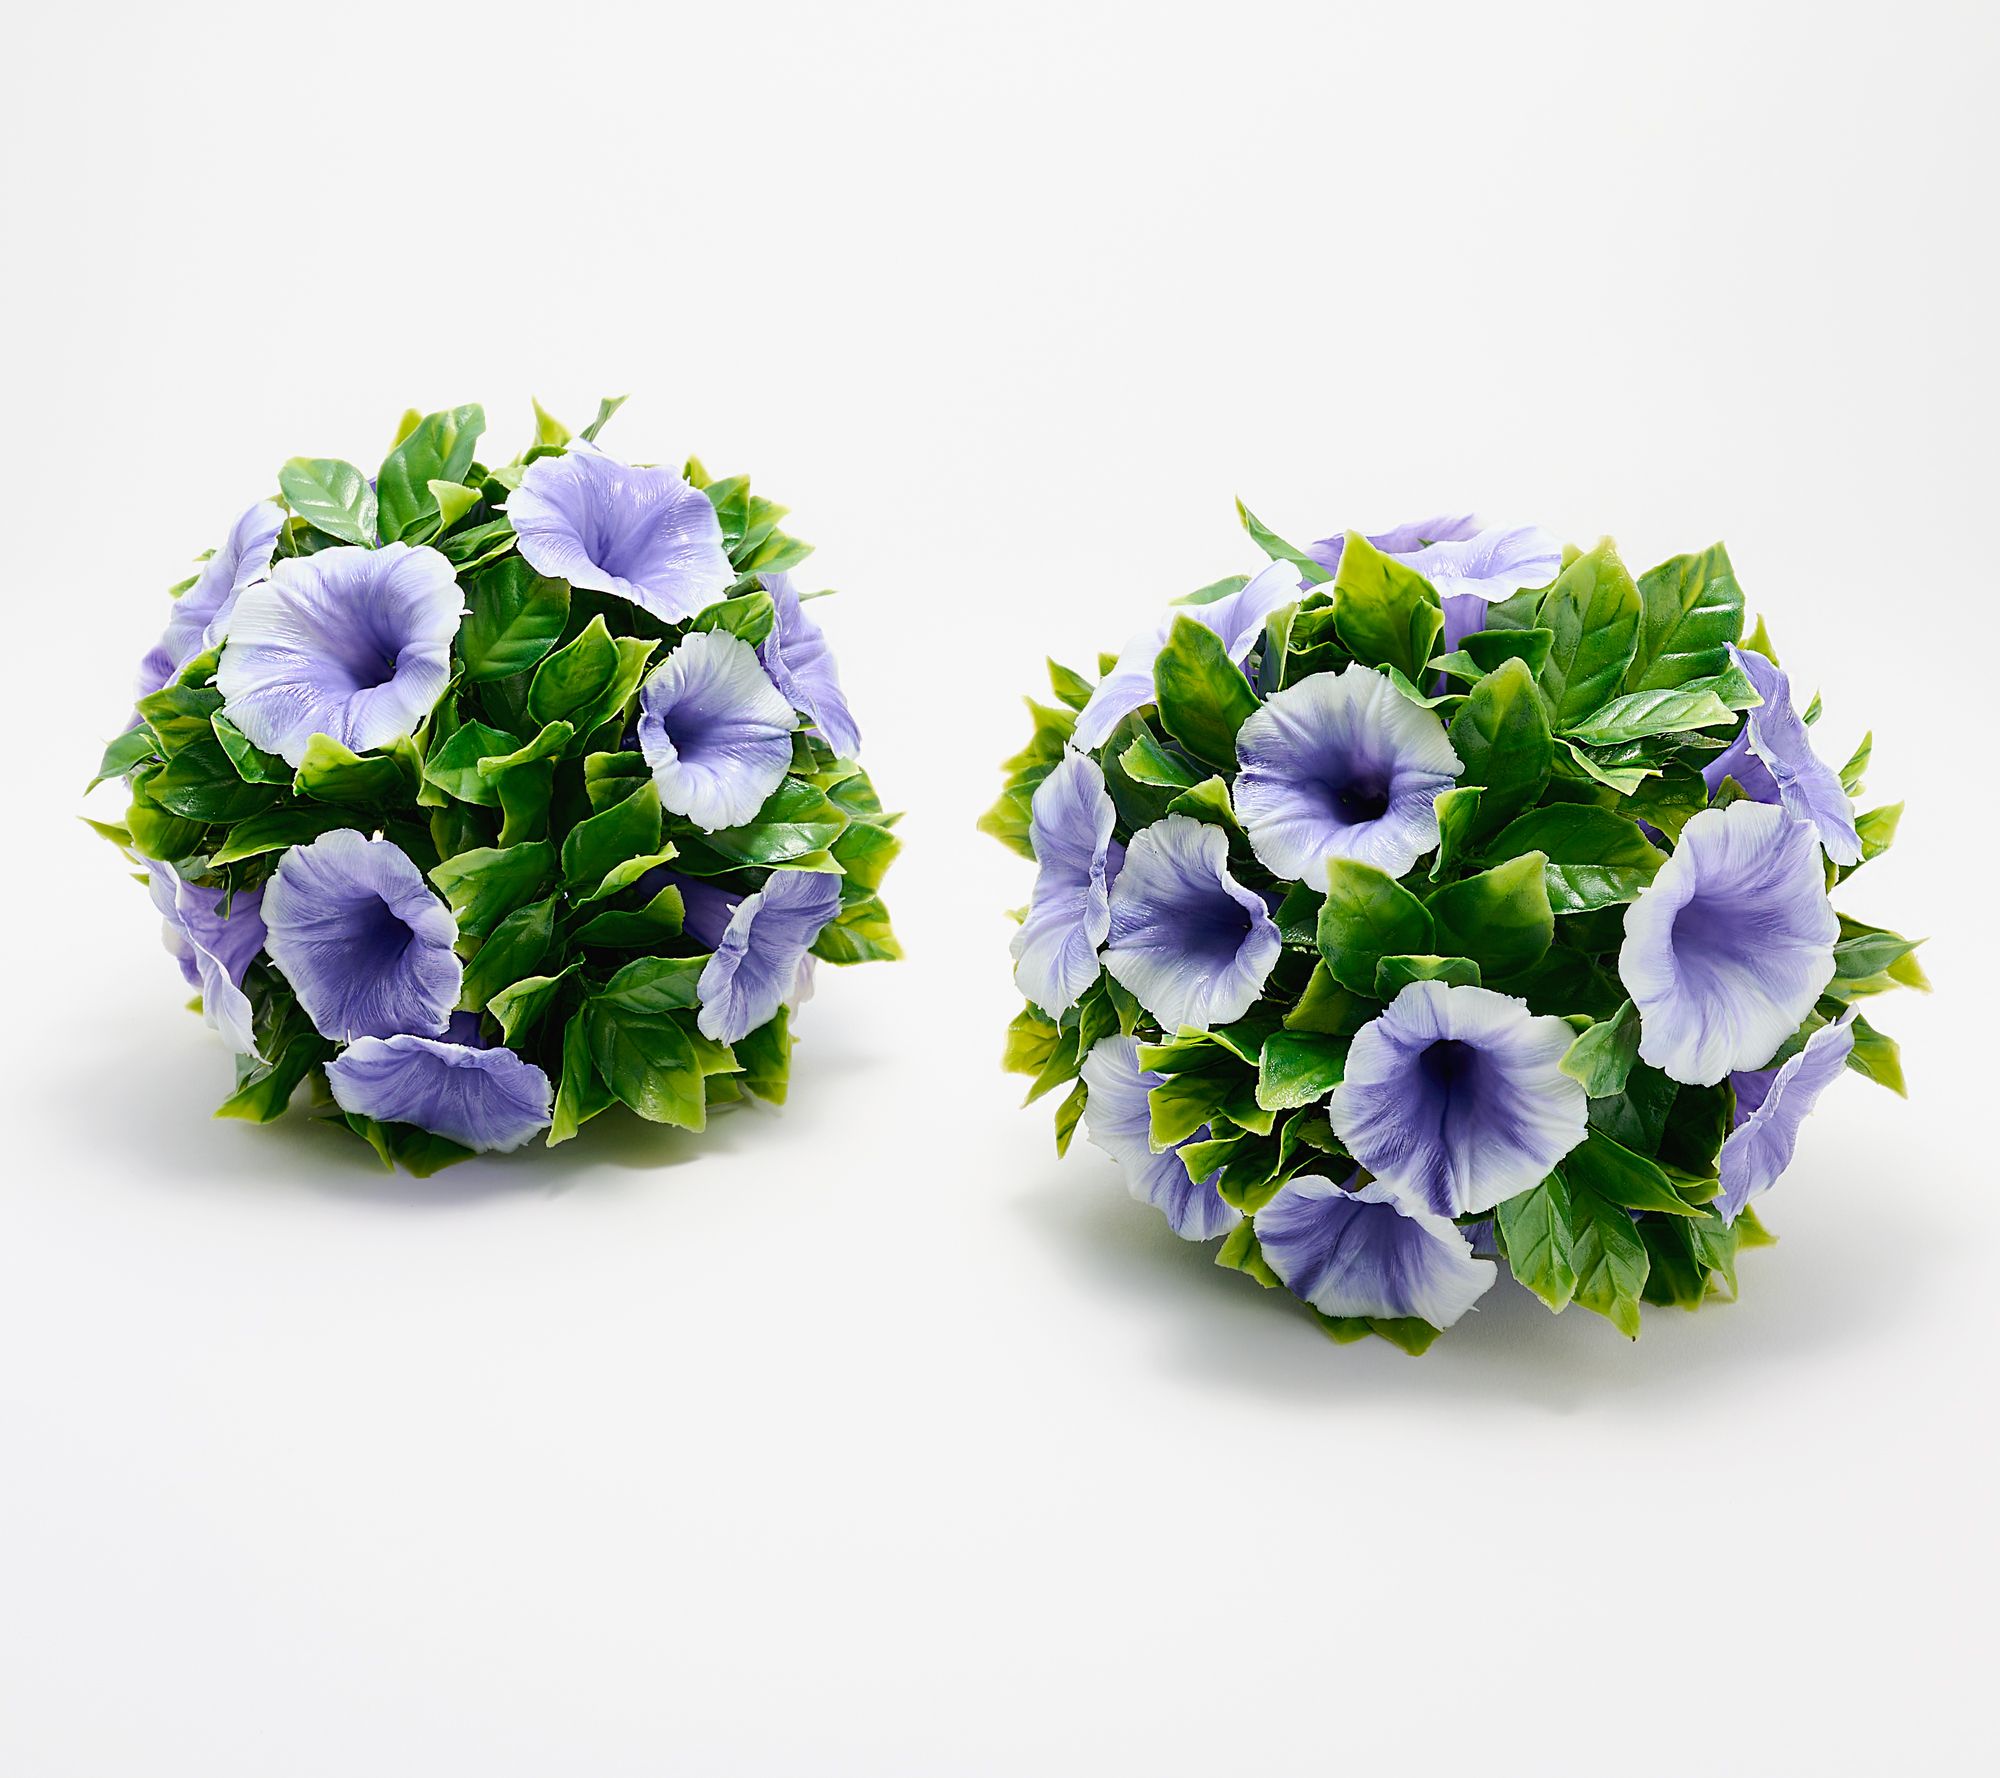 winter themed party favors - Pretty Petunias